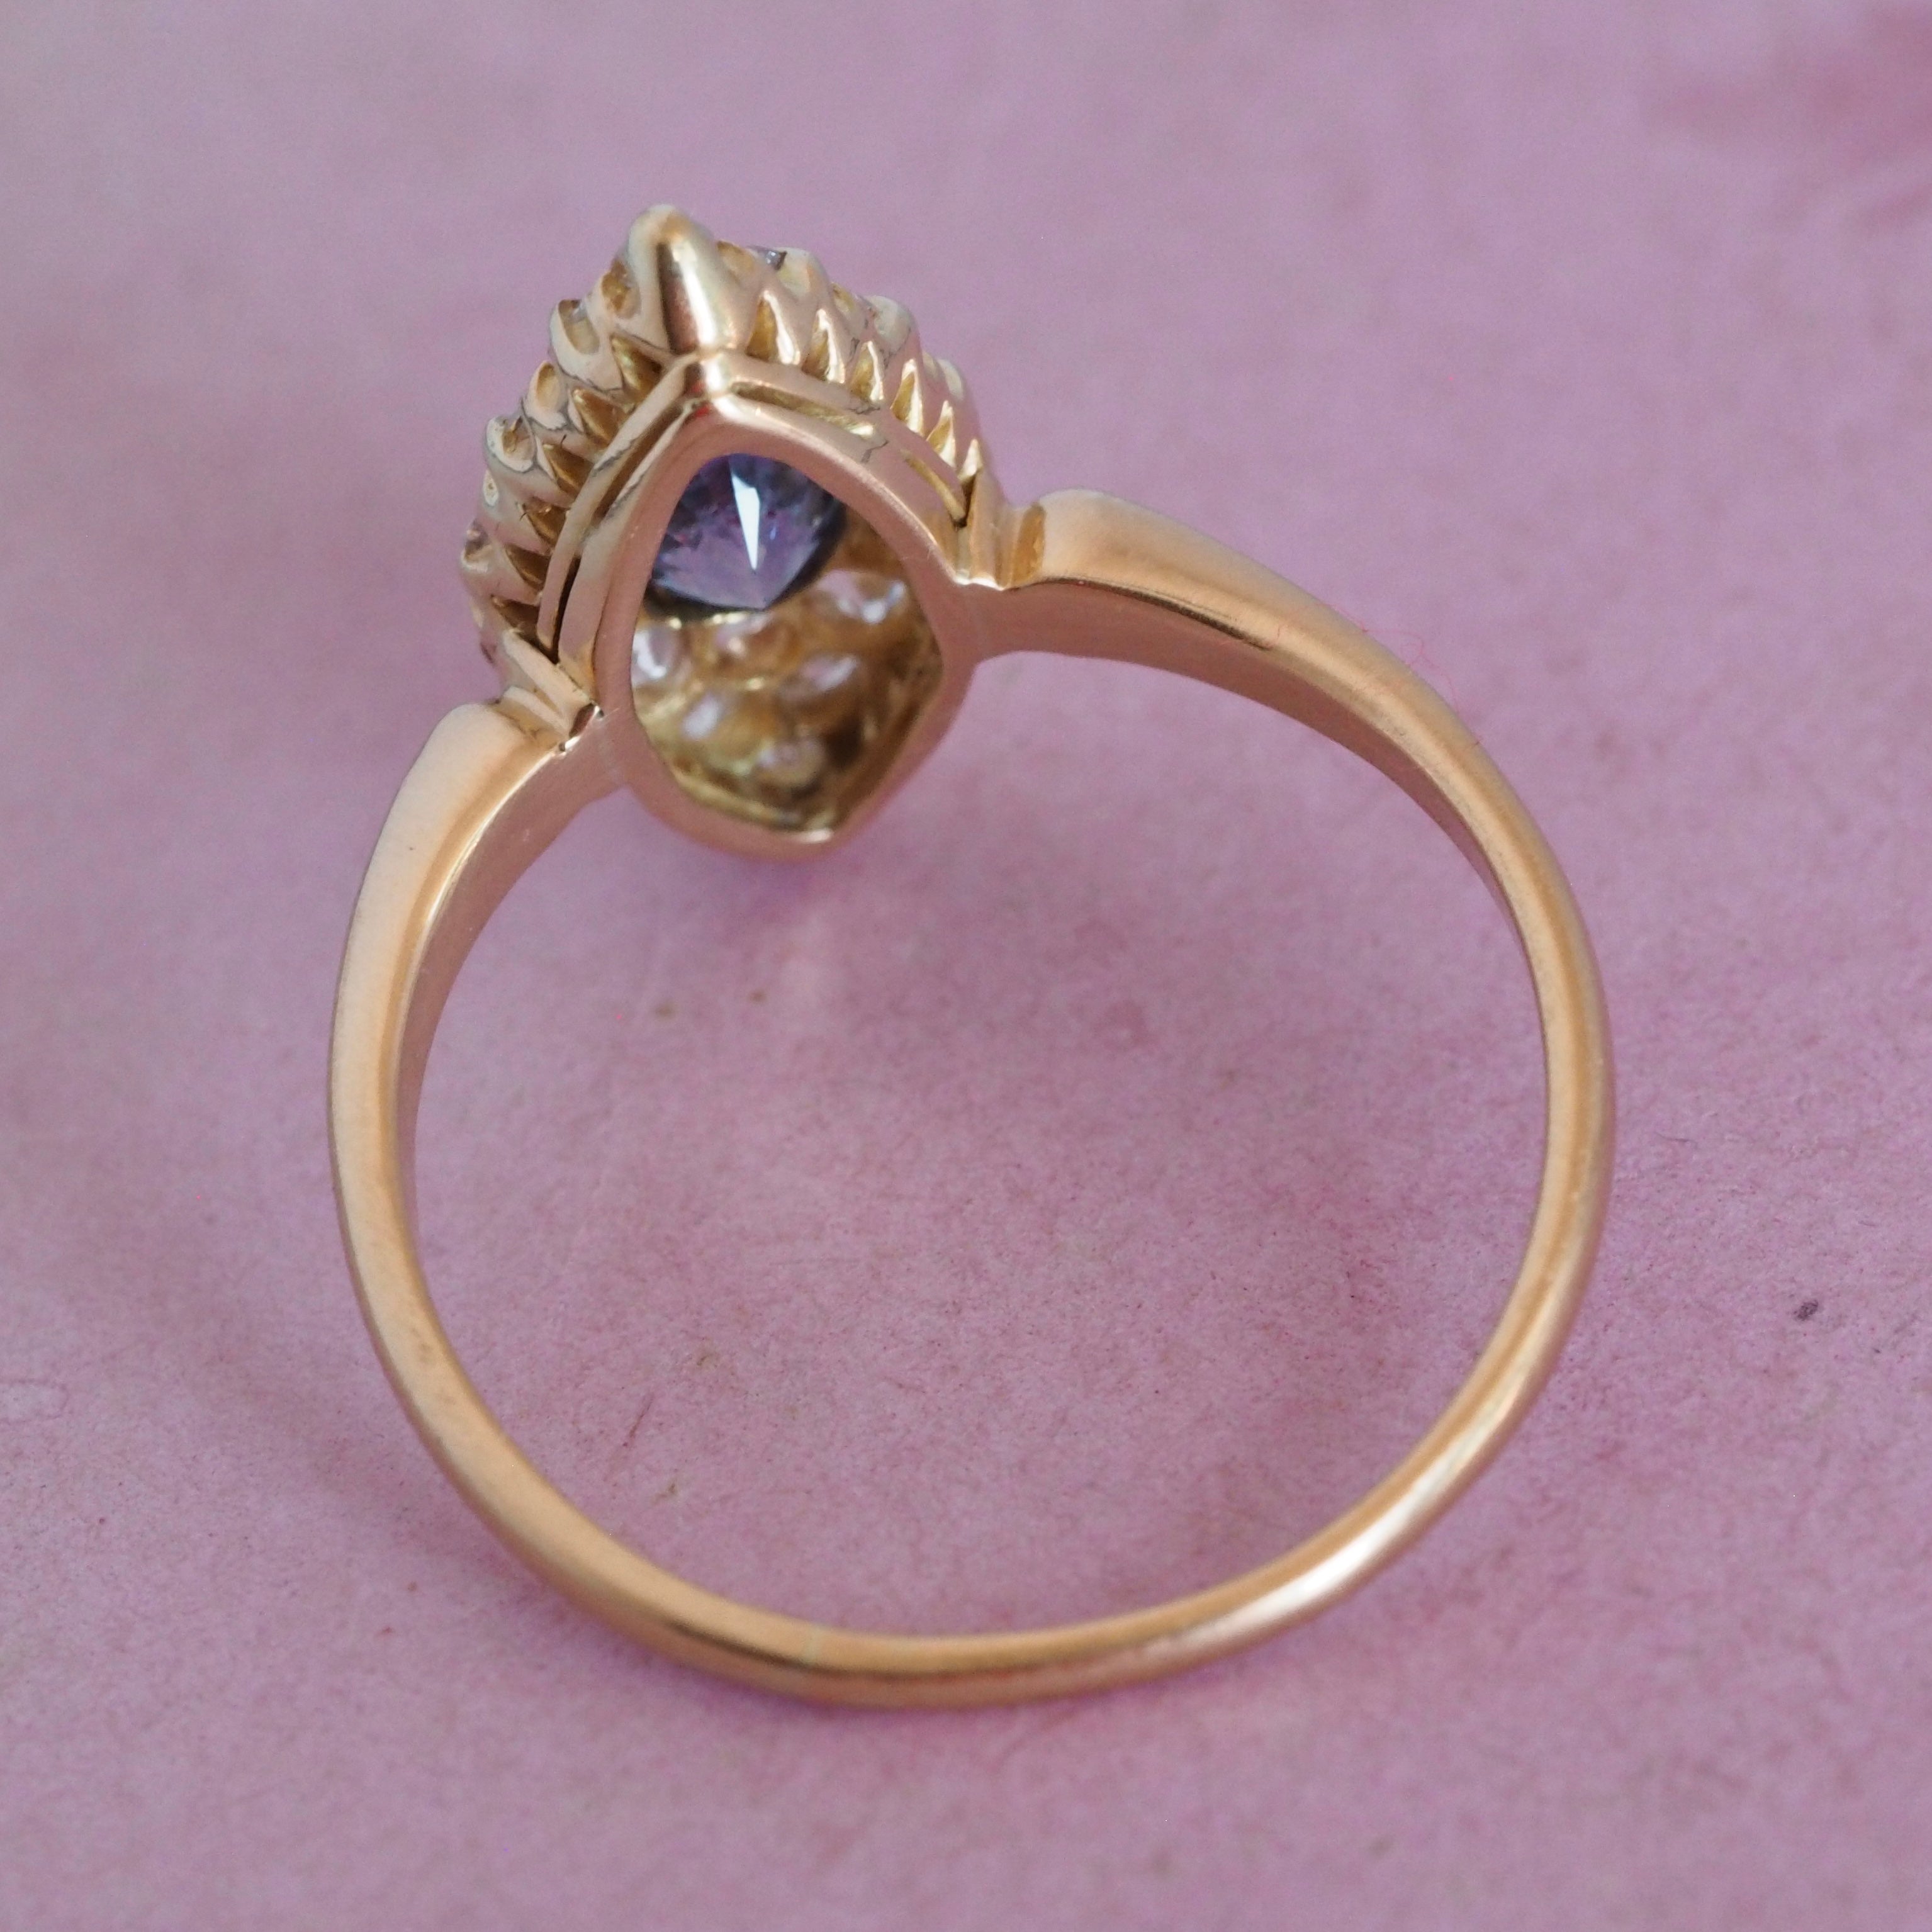 Antique Edwardian 18k Gold Natural Sapphire and Old Mine Cut Diamond Eye Ring